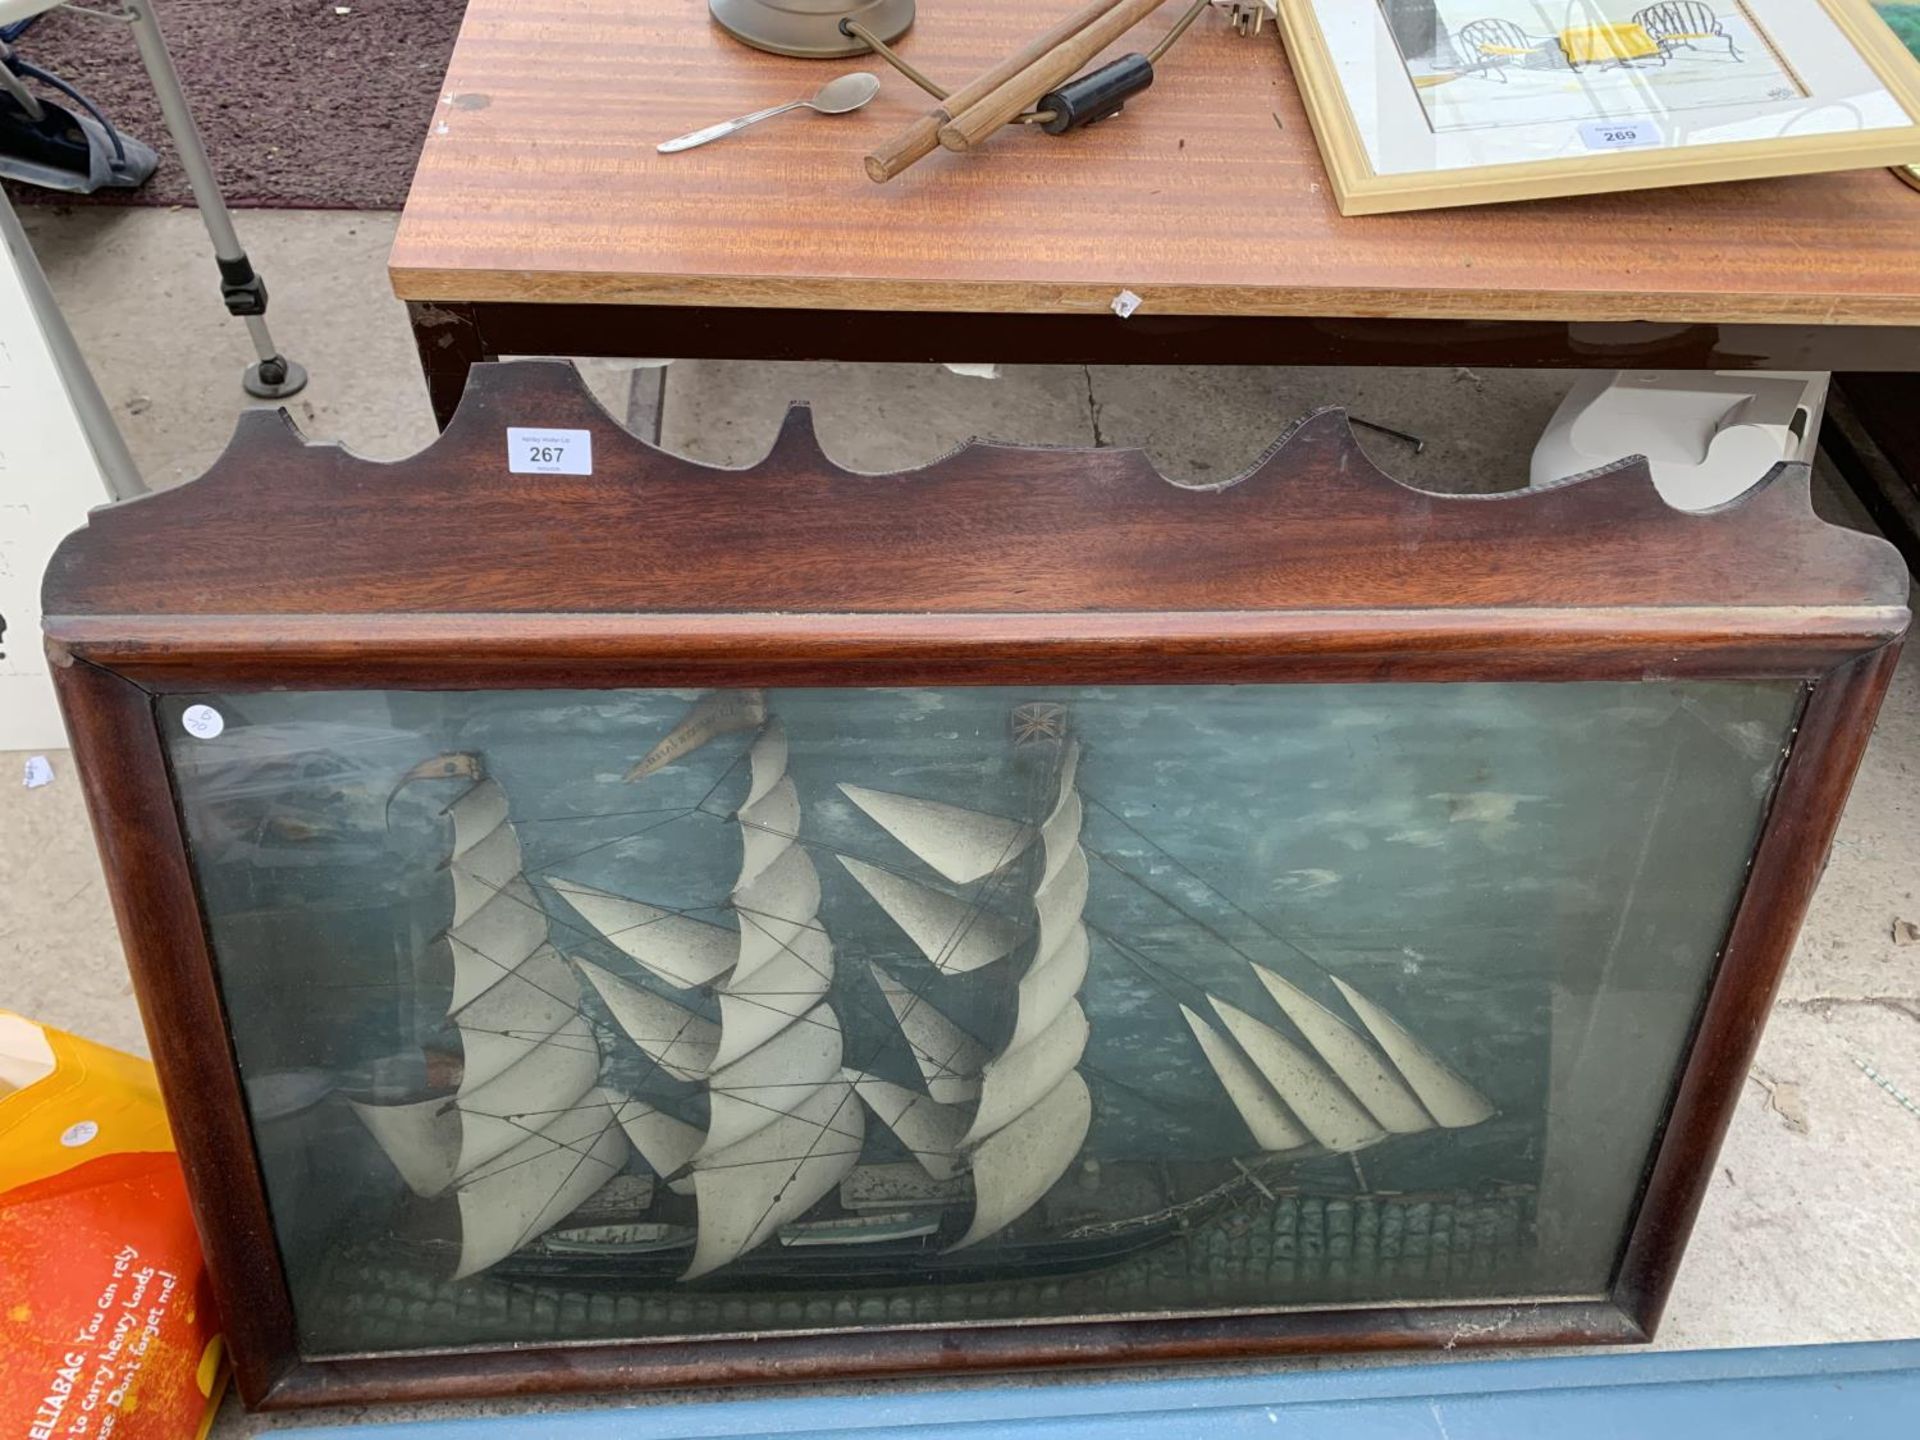 A GALLEON IN A WOODEN DISPLAY CASE